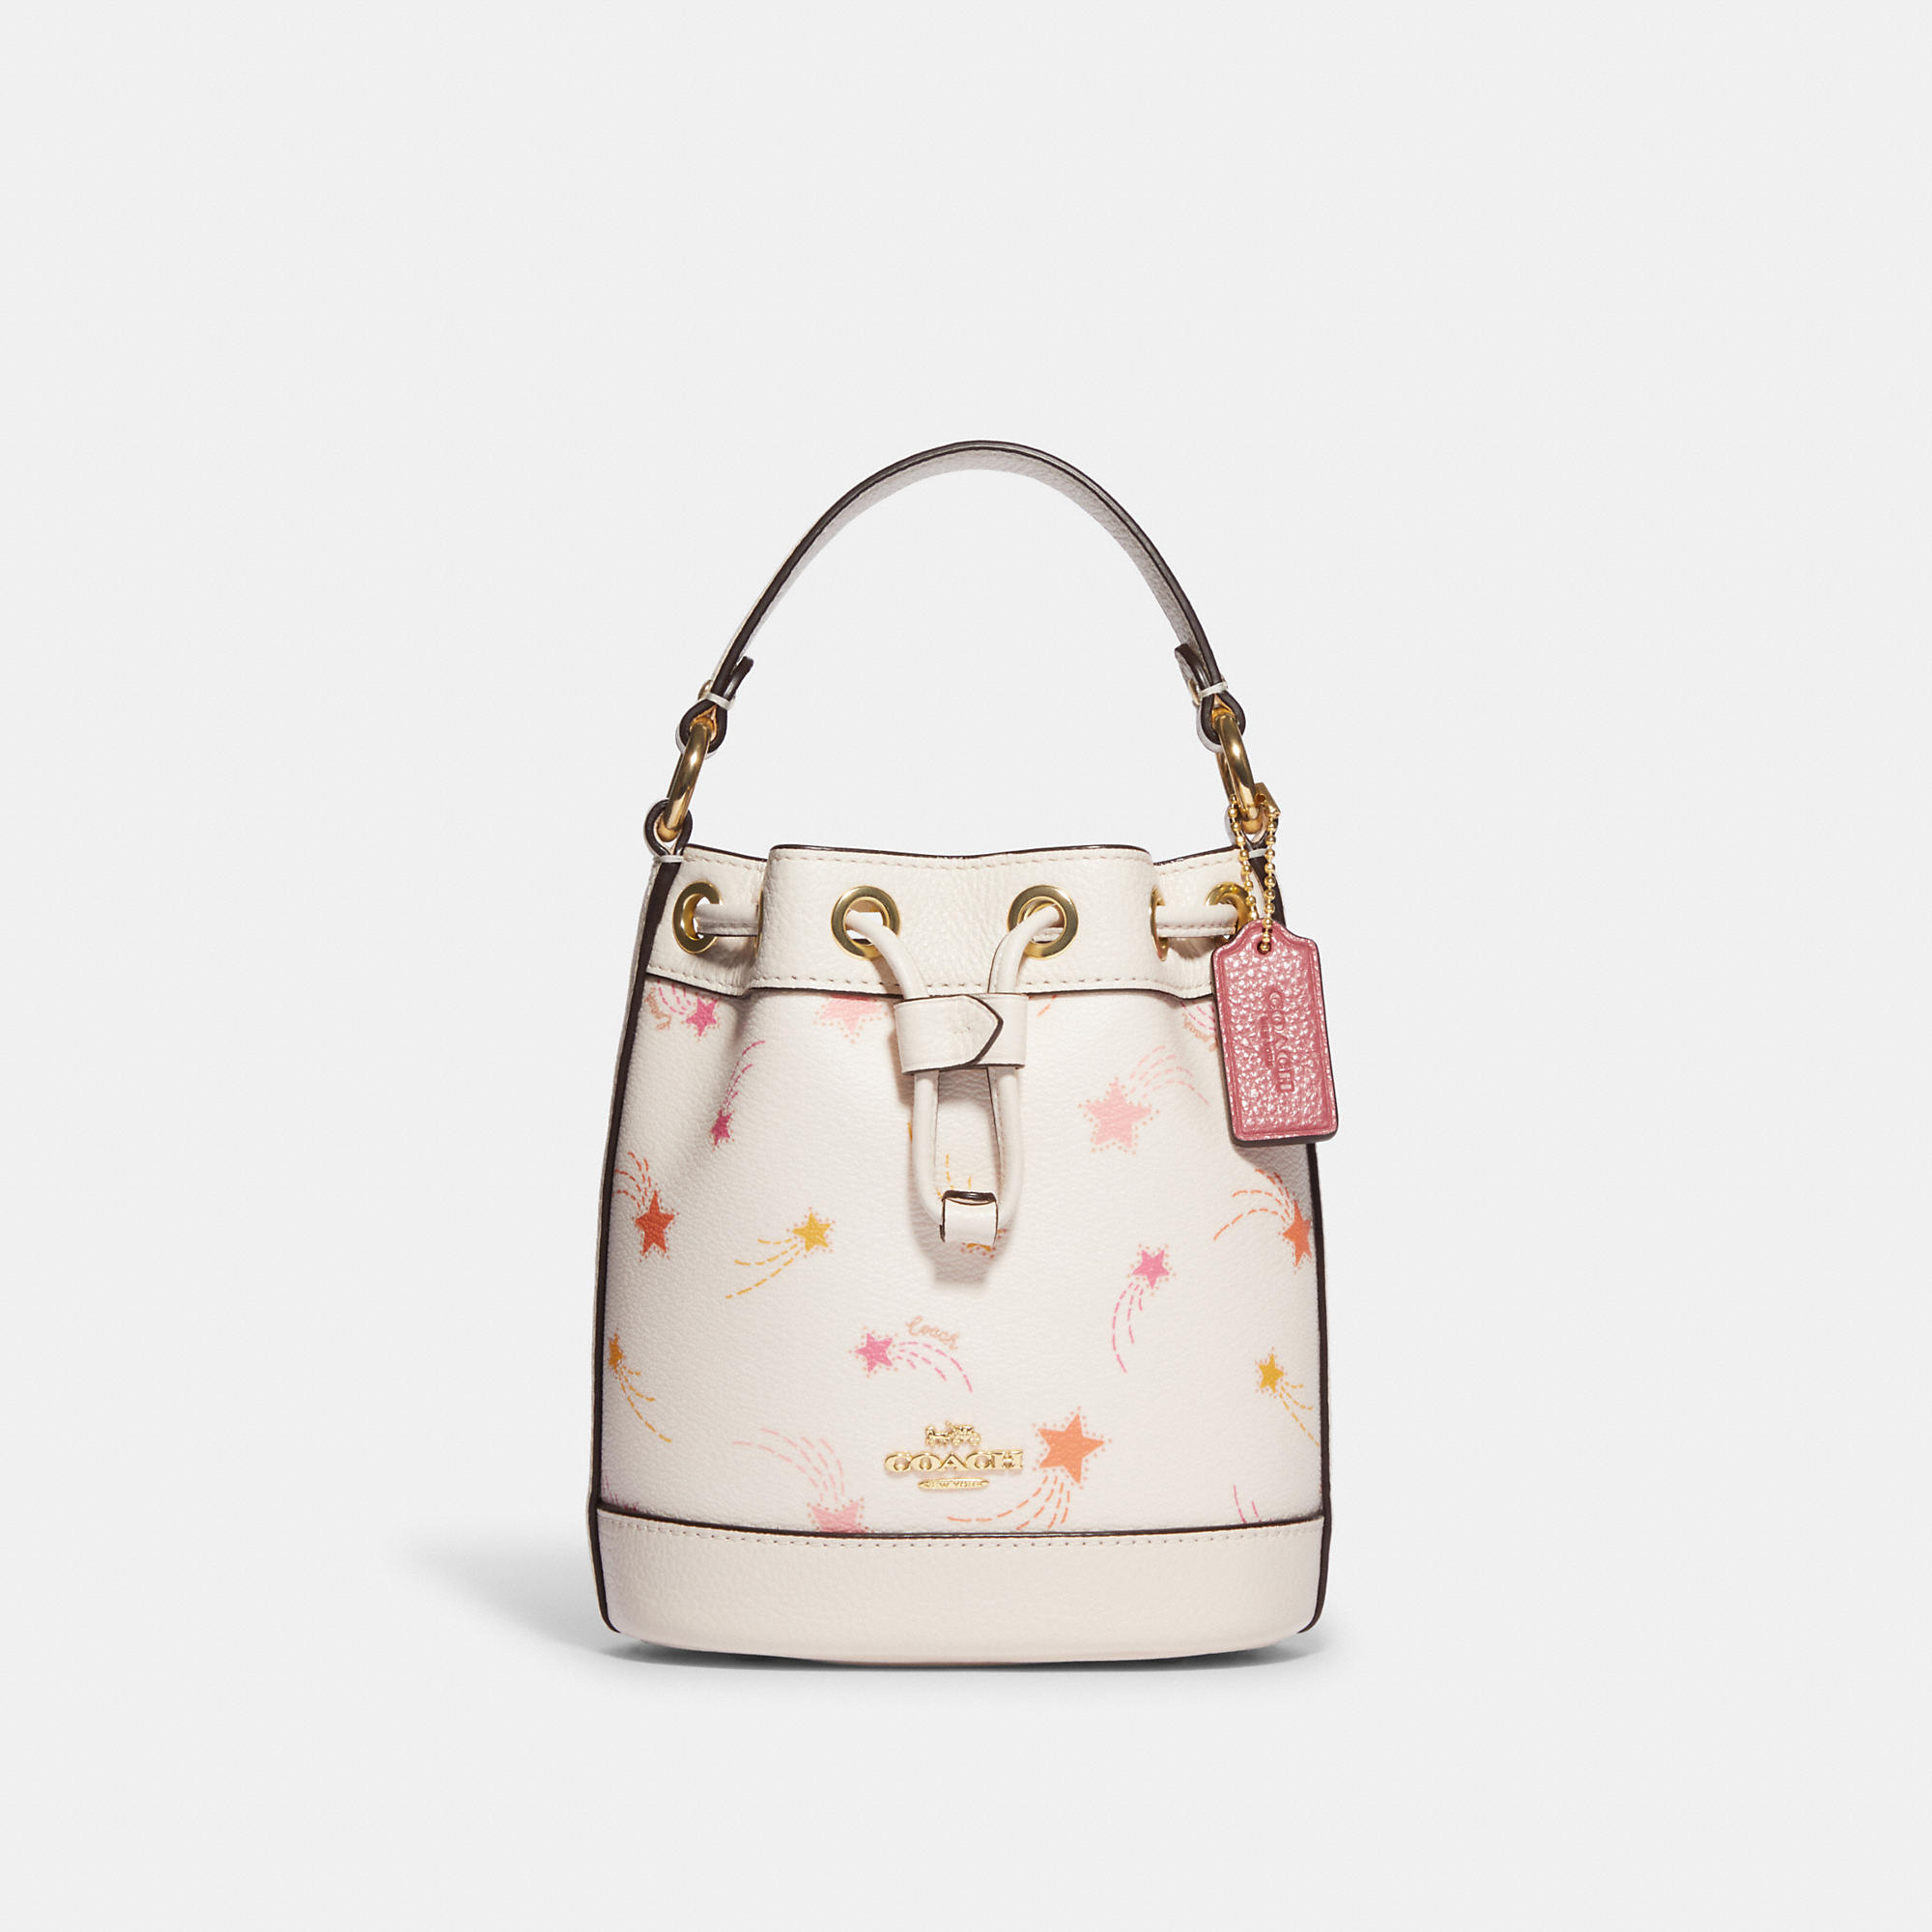 Coach Outlet Dempsey Drawstring Bucket Bag 15 With Shooting Star Print - Gold/Chalk Multi